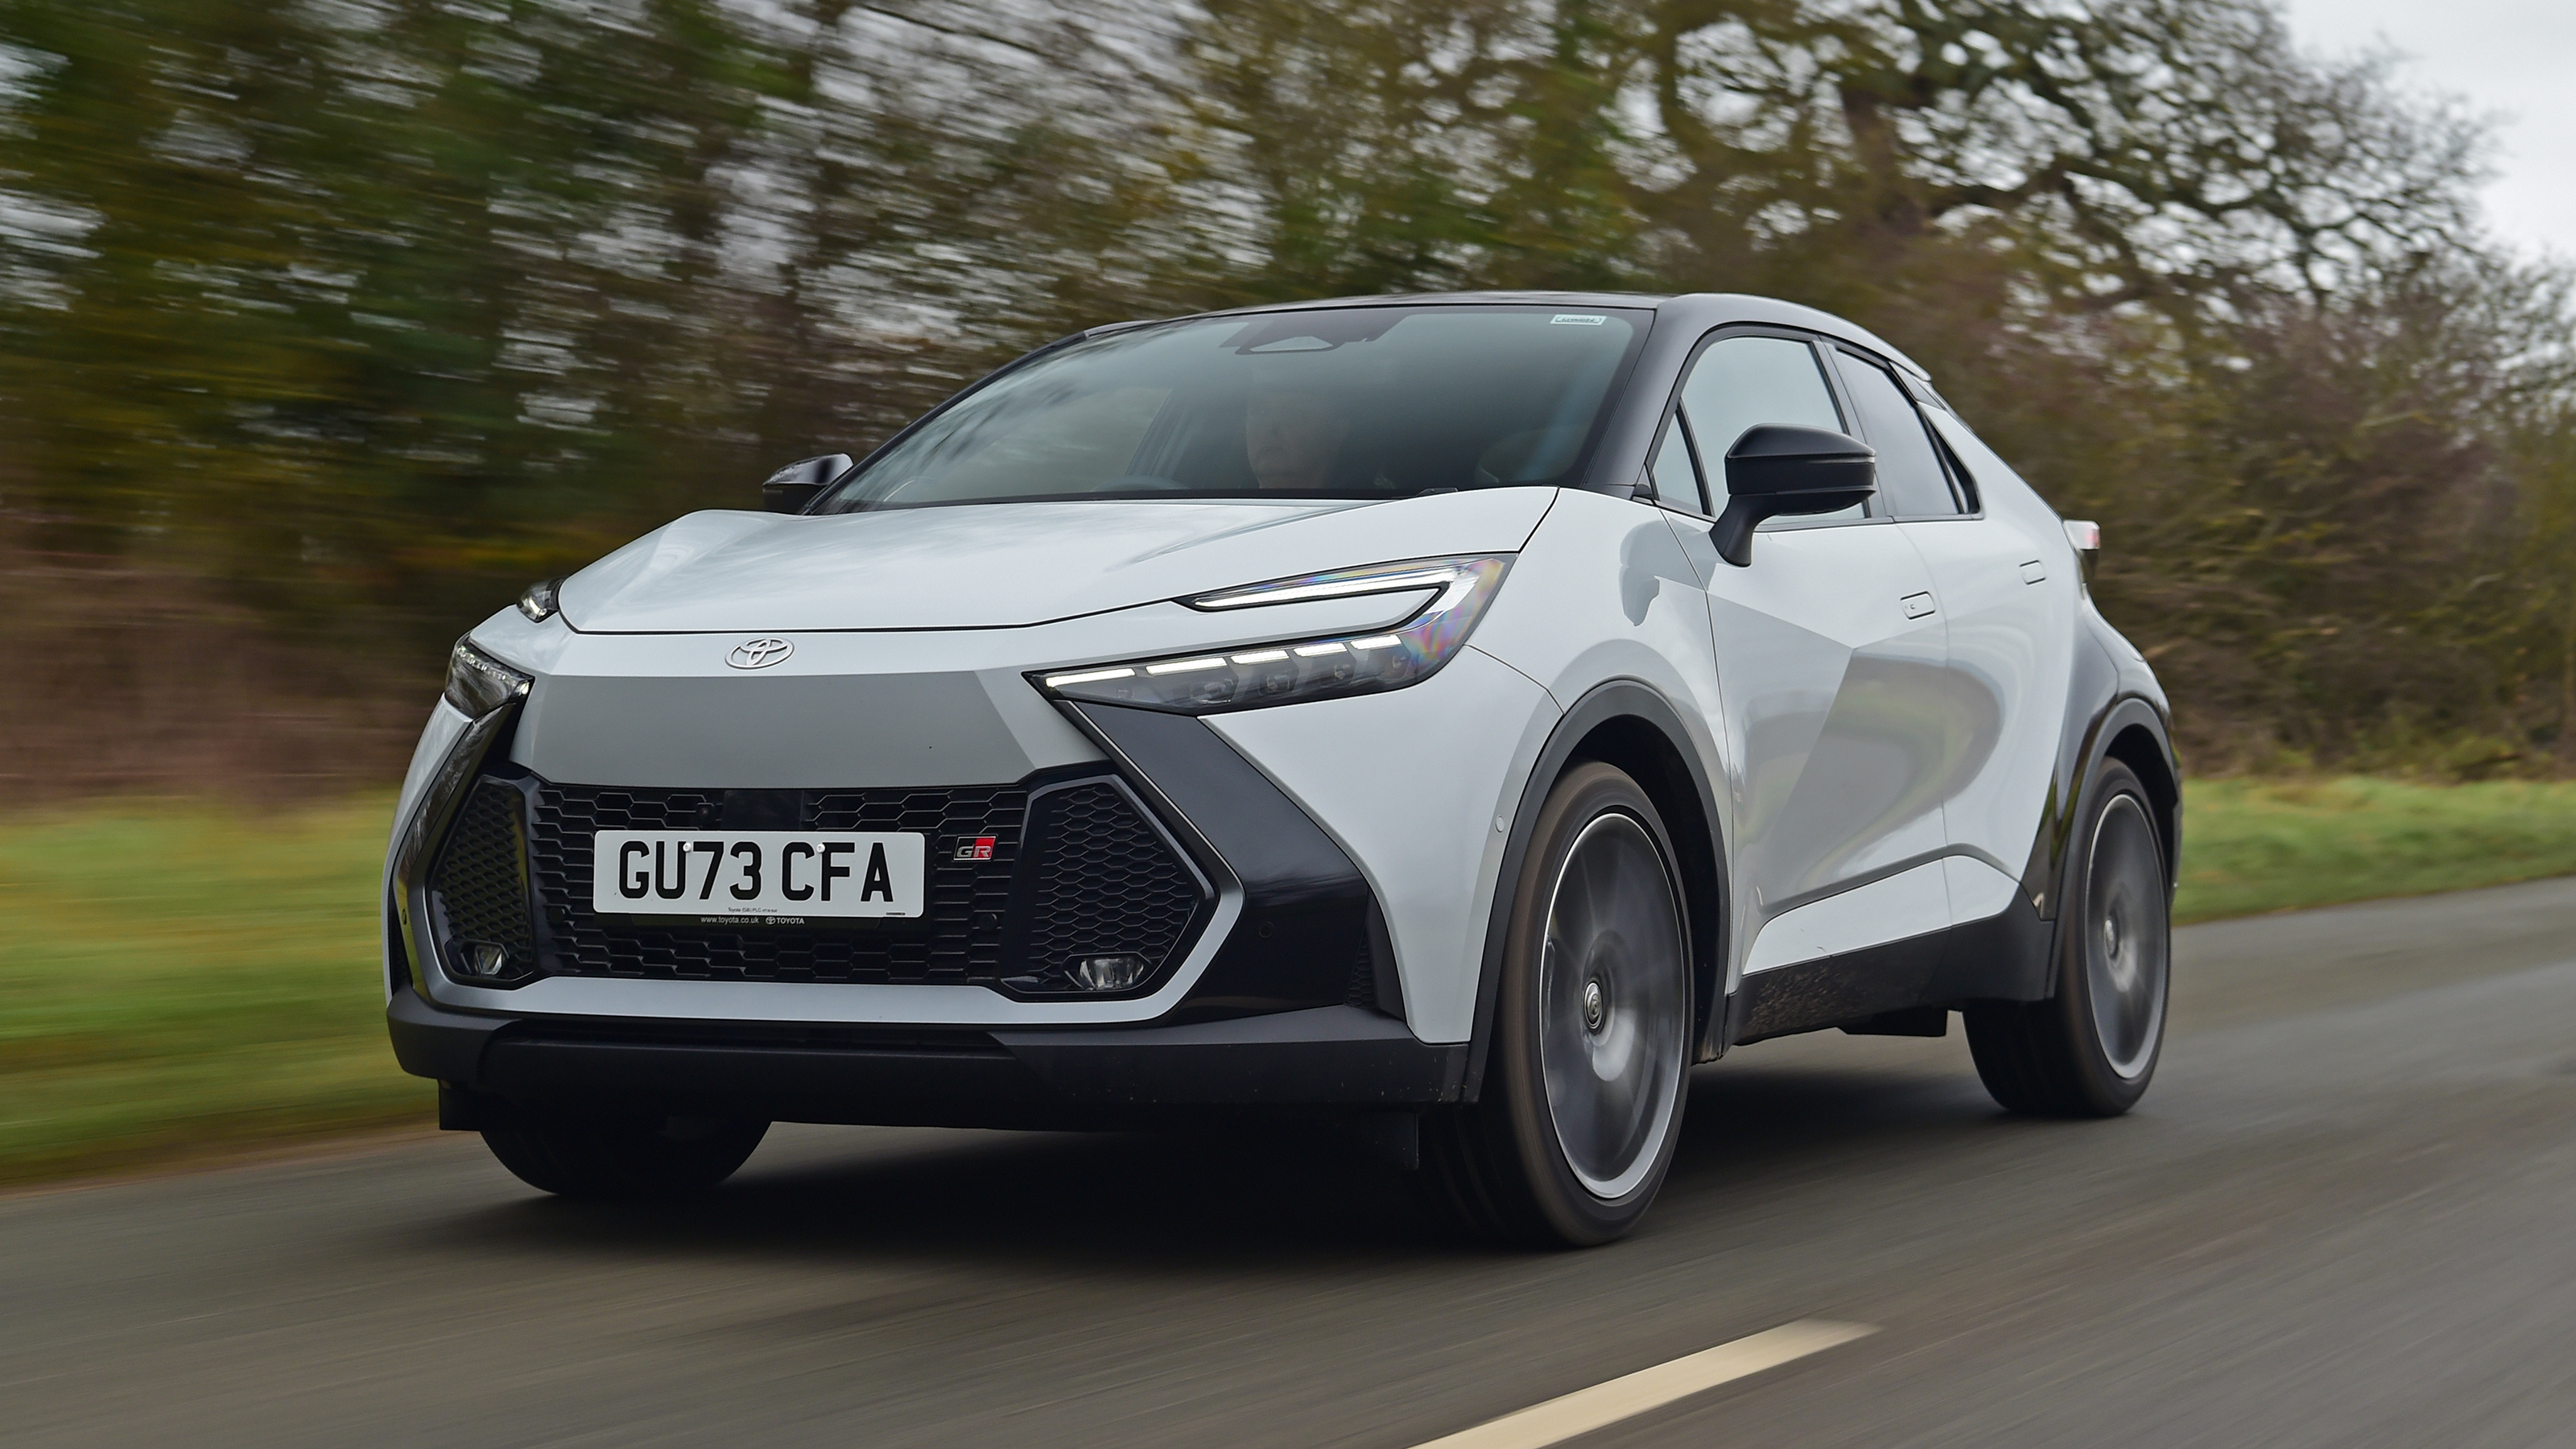 Going hybrid with the Toyota C-HR #AD - Dad Blog UK